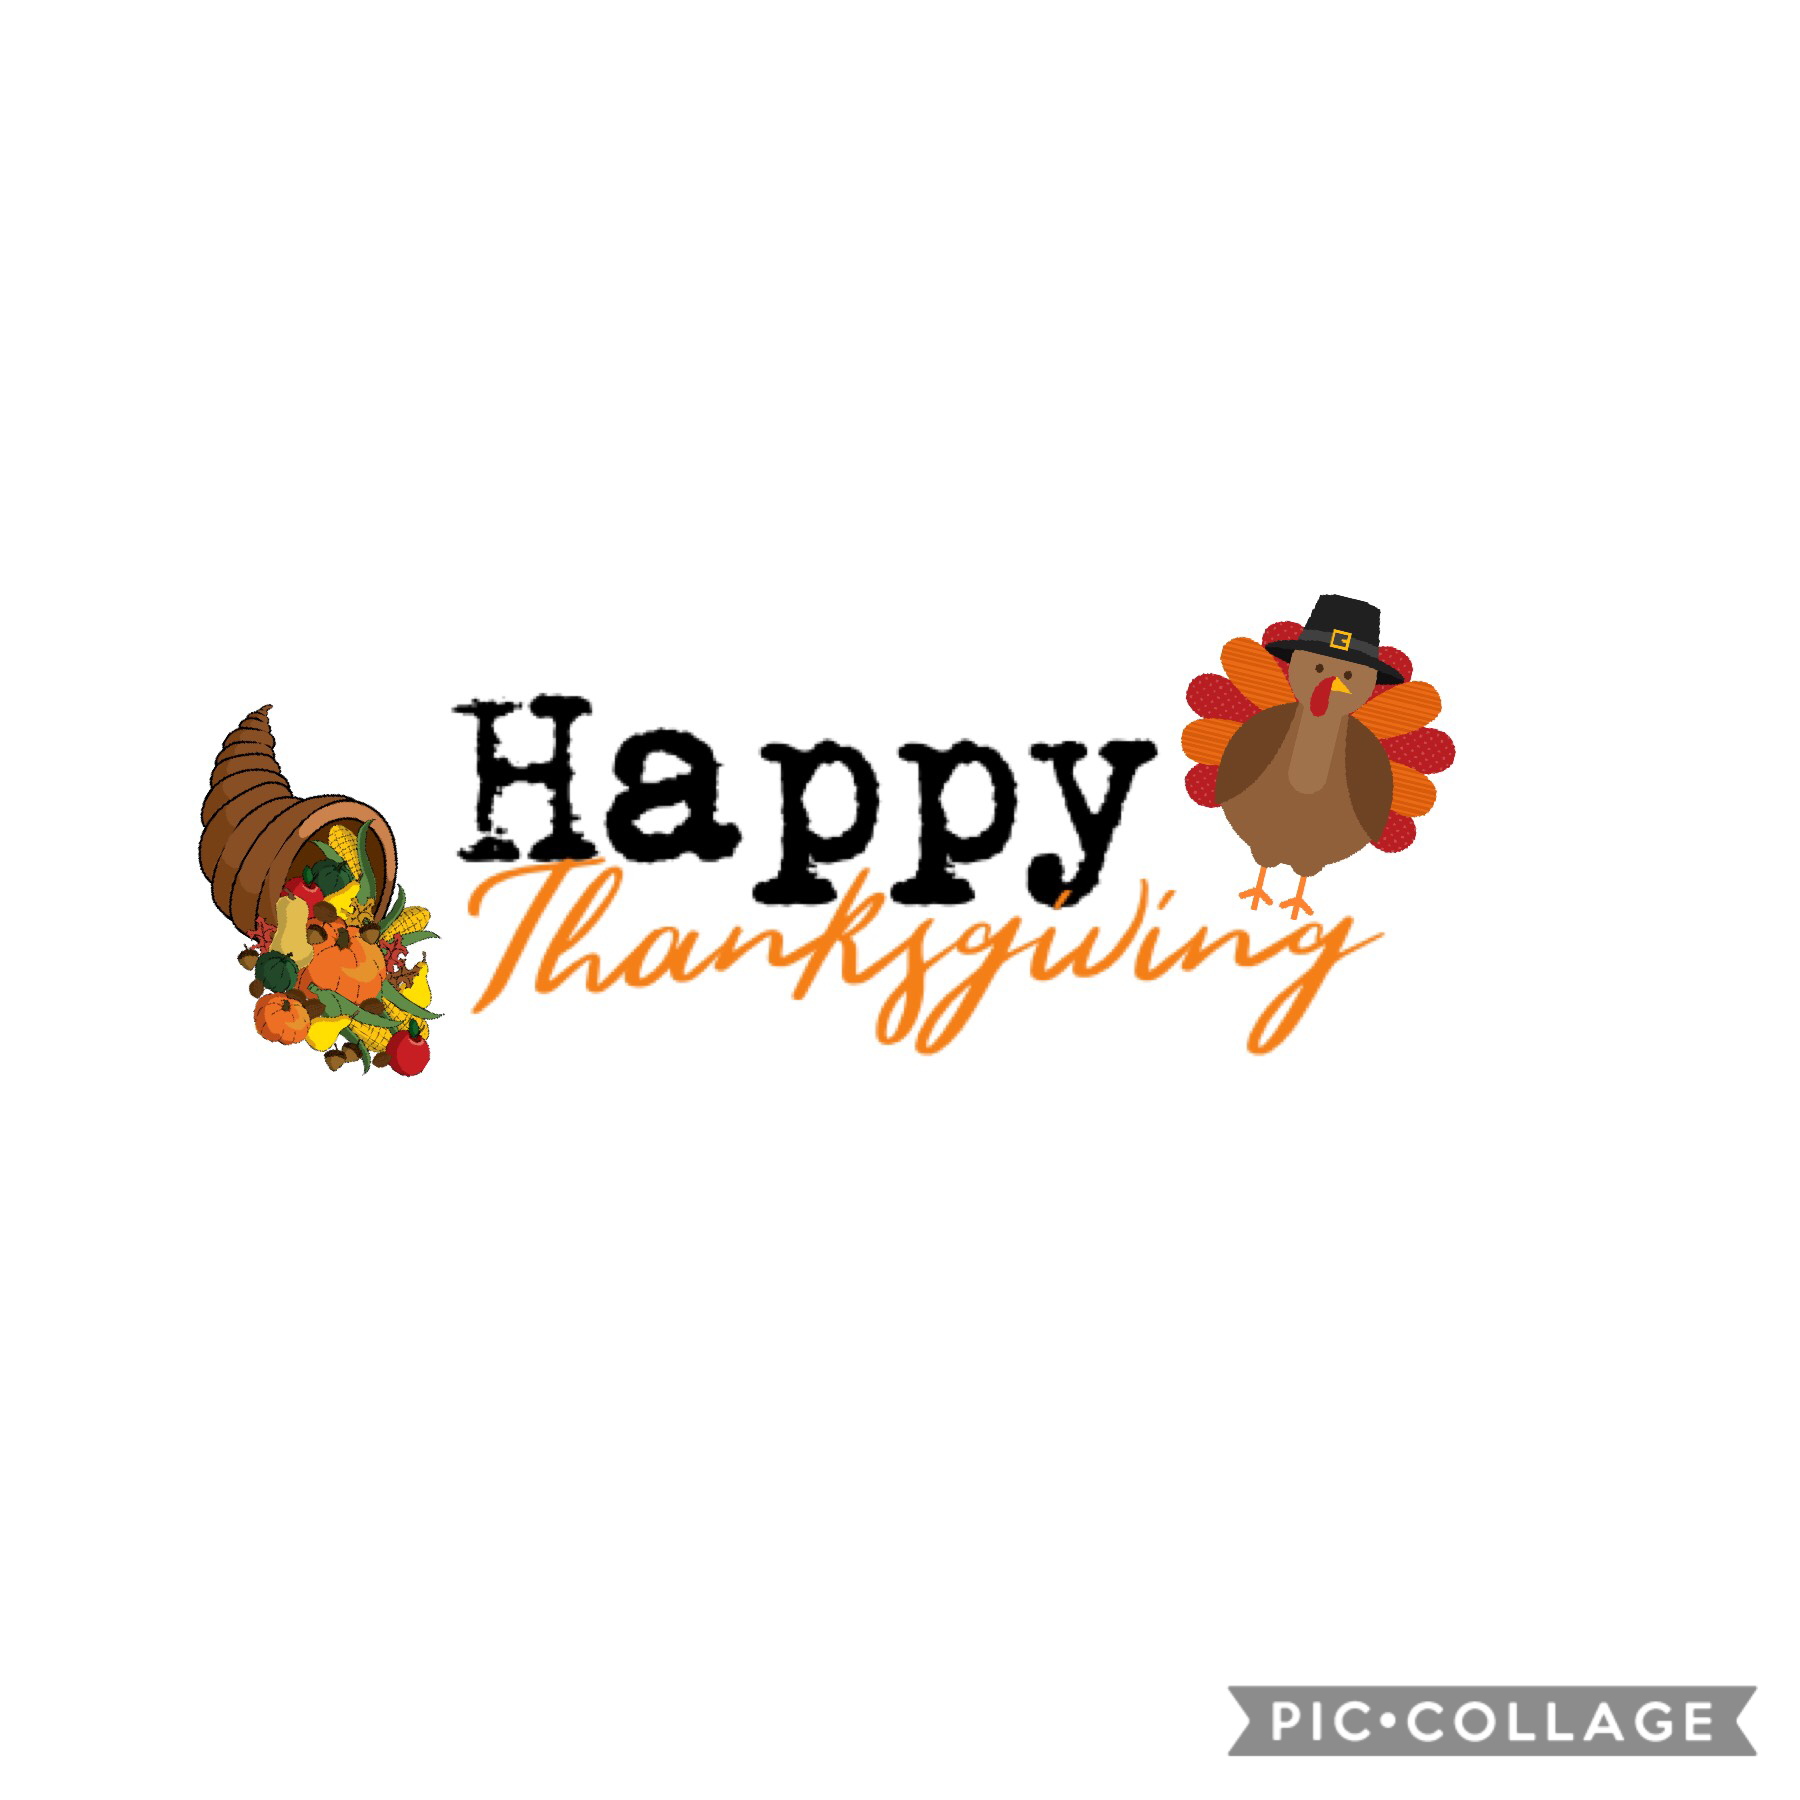 🦃click!🦃
HAPPY THANKSGIVING! 🍁🍽 I hope you all spend it with your family and happy. Q: what are you thankful for? A: my friends, family, my house, and everything happy in my life. 🥰